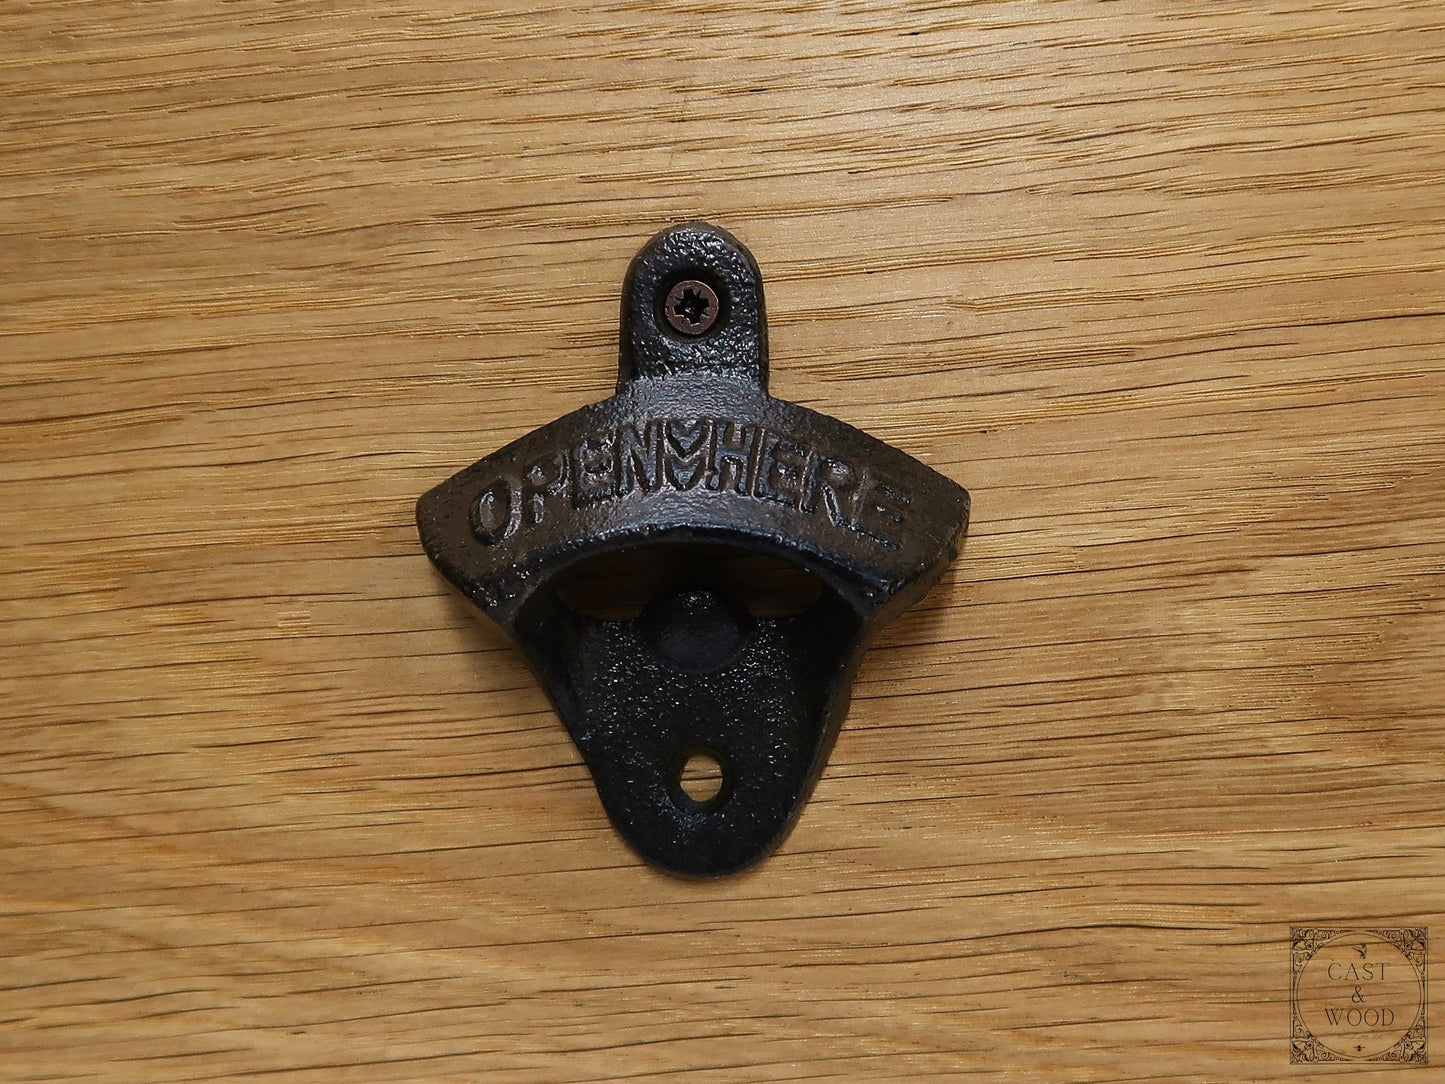 OPEN HERE Cast Iron Wall Mounted Bottle Opener freeshipping - Cast & Wood